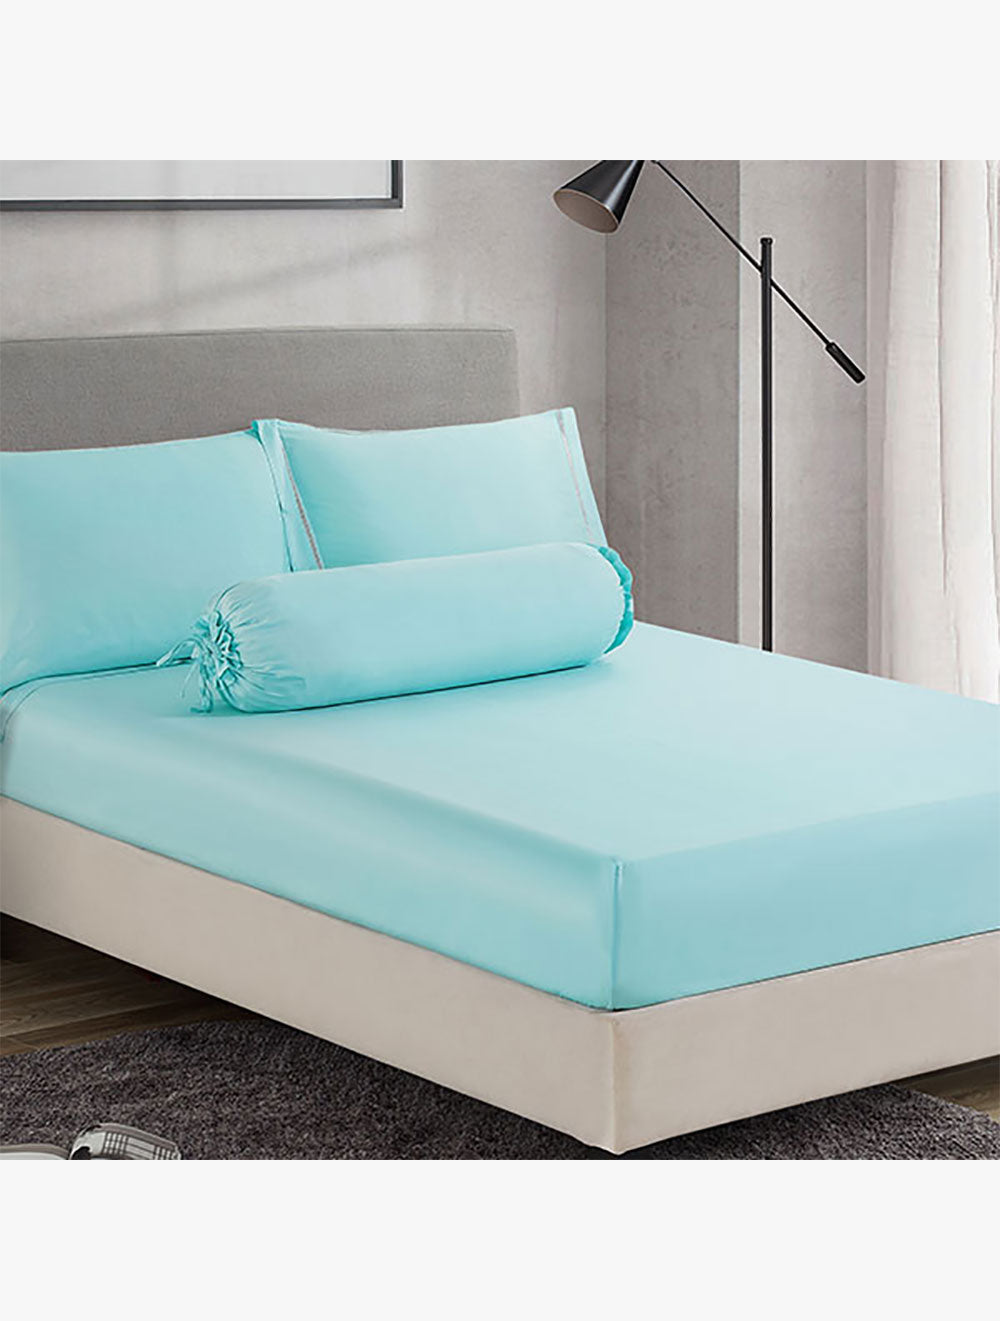 TUFT & QUILT
EXQUISITE-TURQUOISE FITTED SHEET SET 180 CM X 200 CM